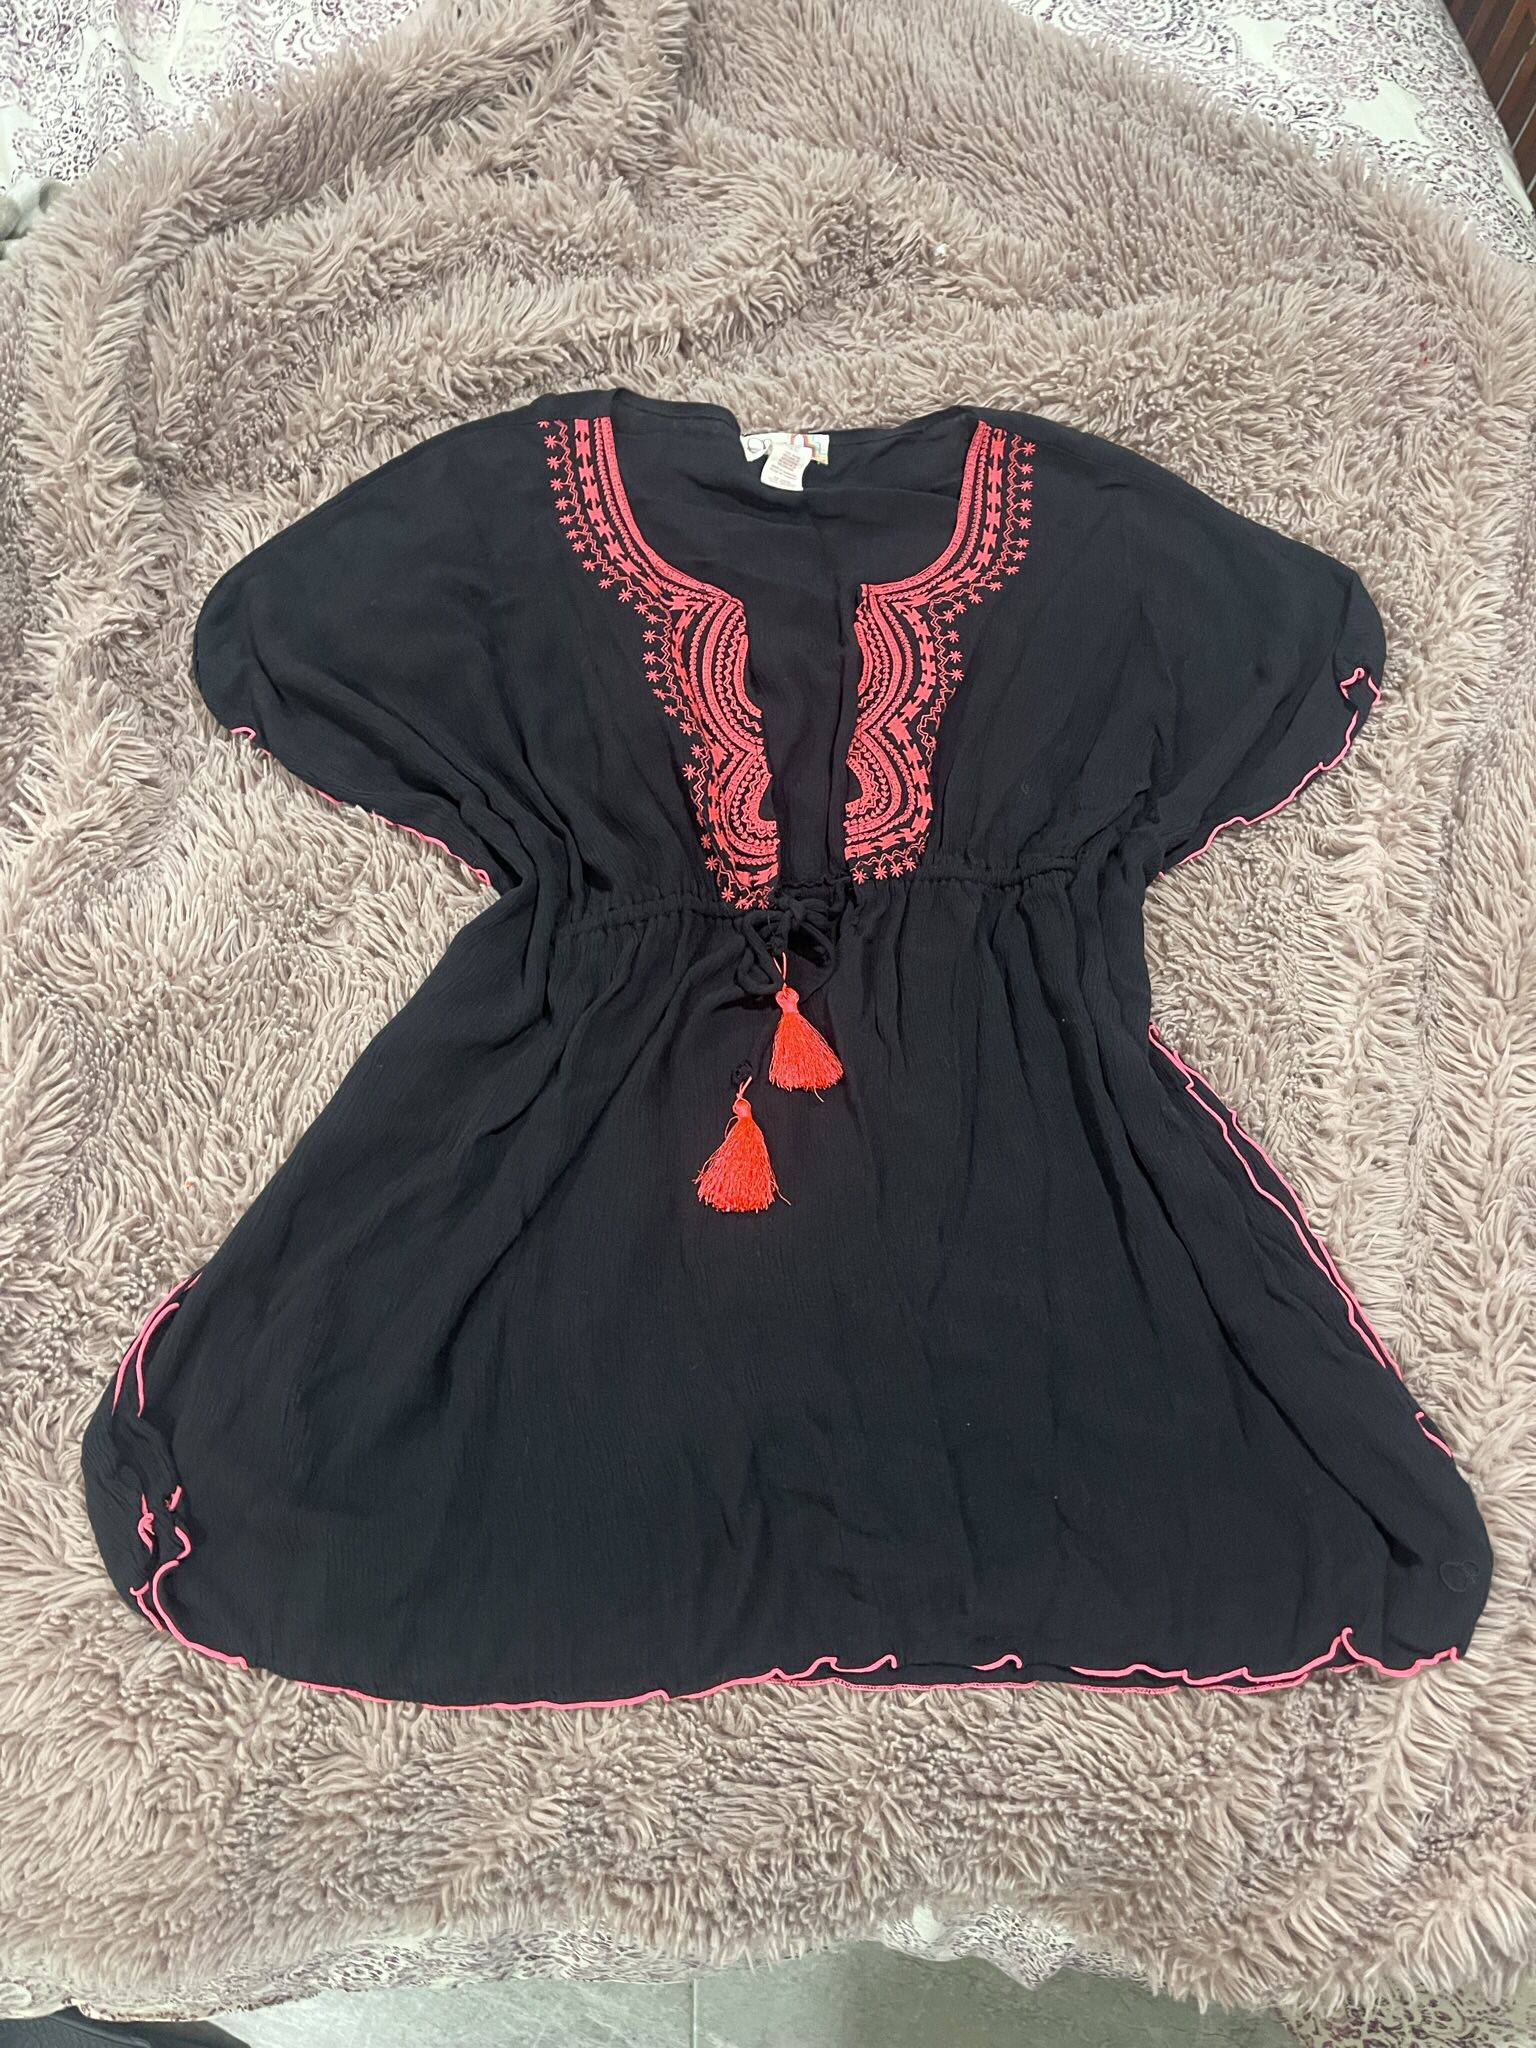 OP Women Black with Hot Pink Embroidery Details Swim Cover Up 